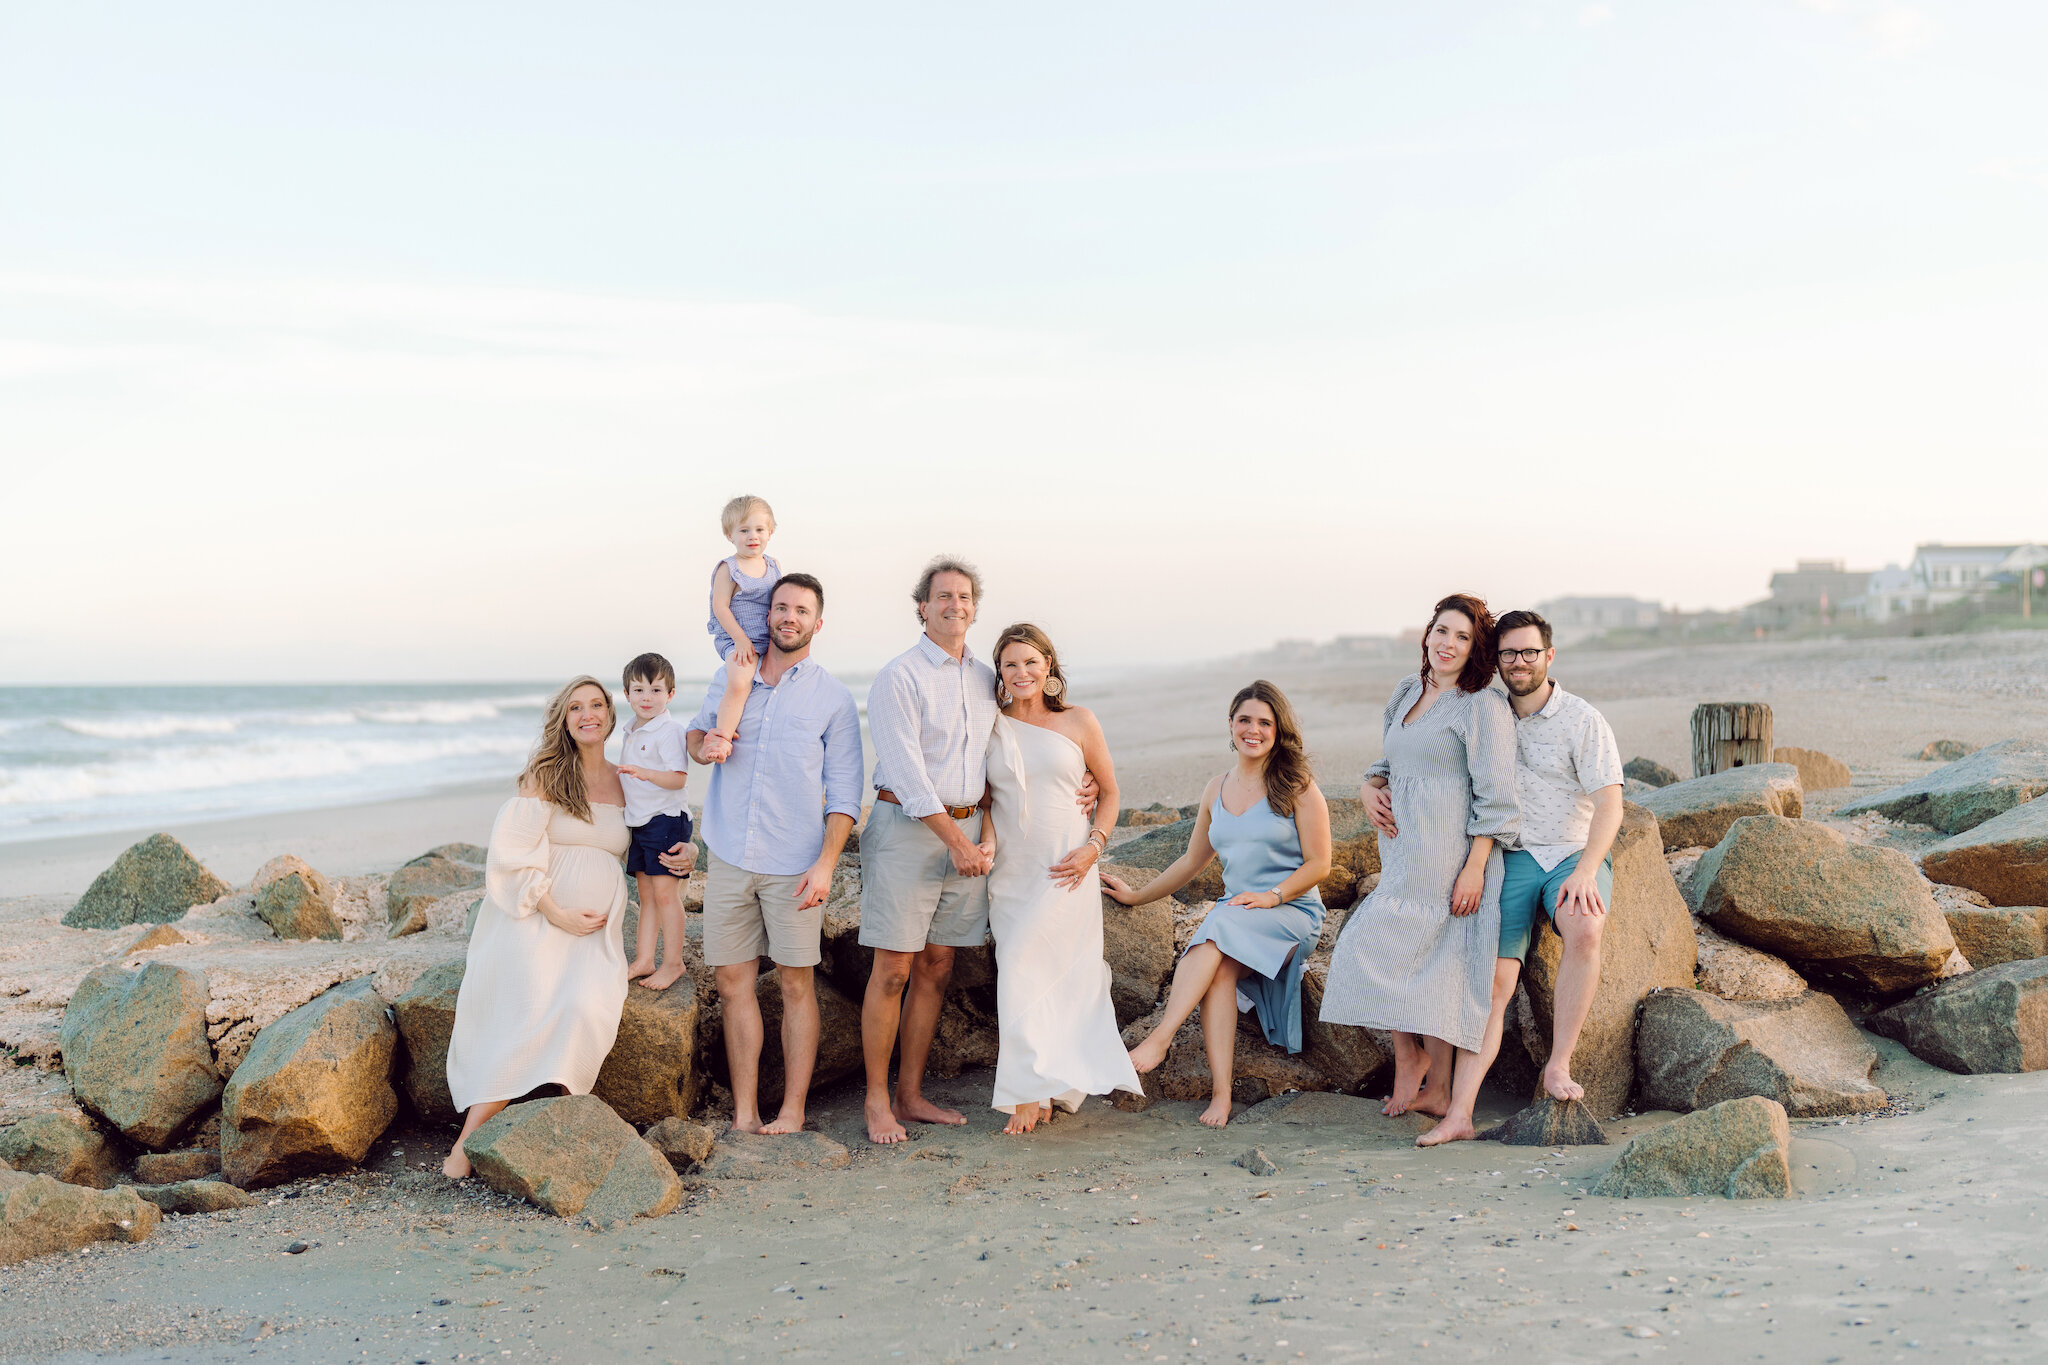 Myrtle Beach Family Photographer - Family Sitting on the Rocks during Photoshoot in Myrtle Beach